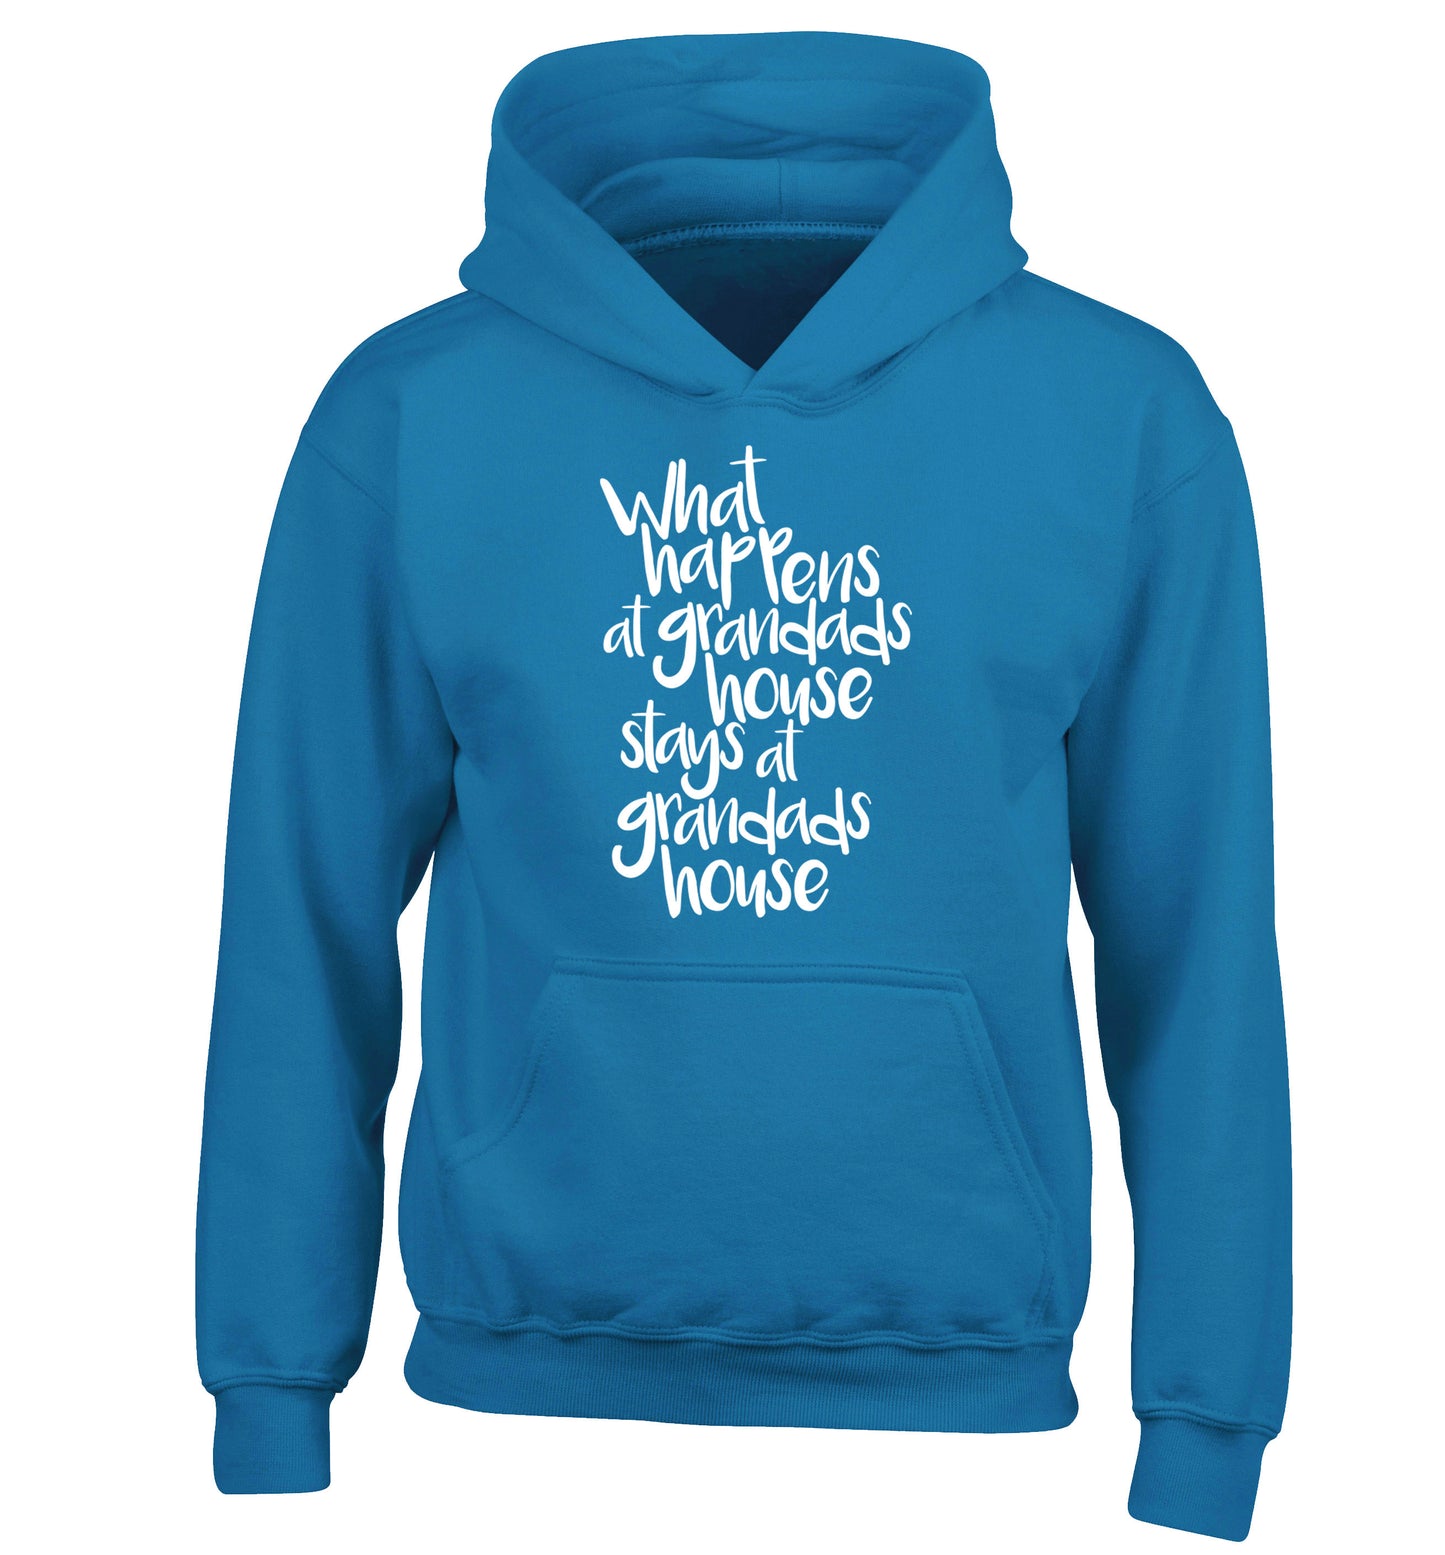 What happens at grandads house stays at grandads house children's blue hoodie 12-14 Years